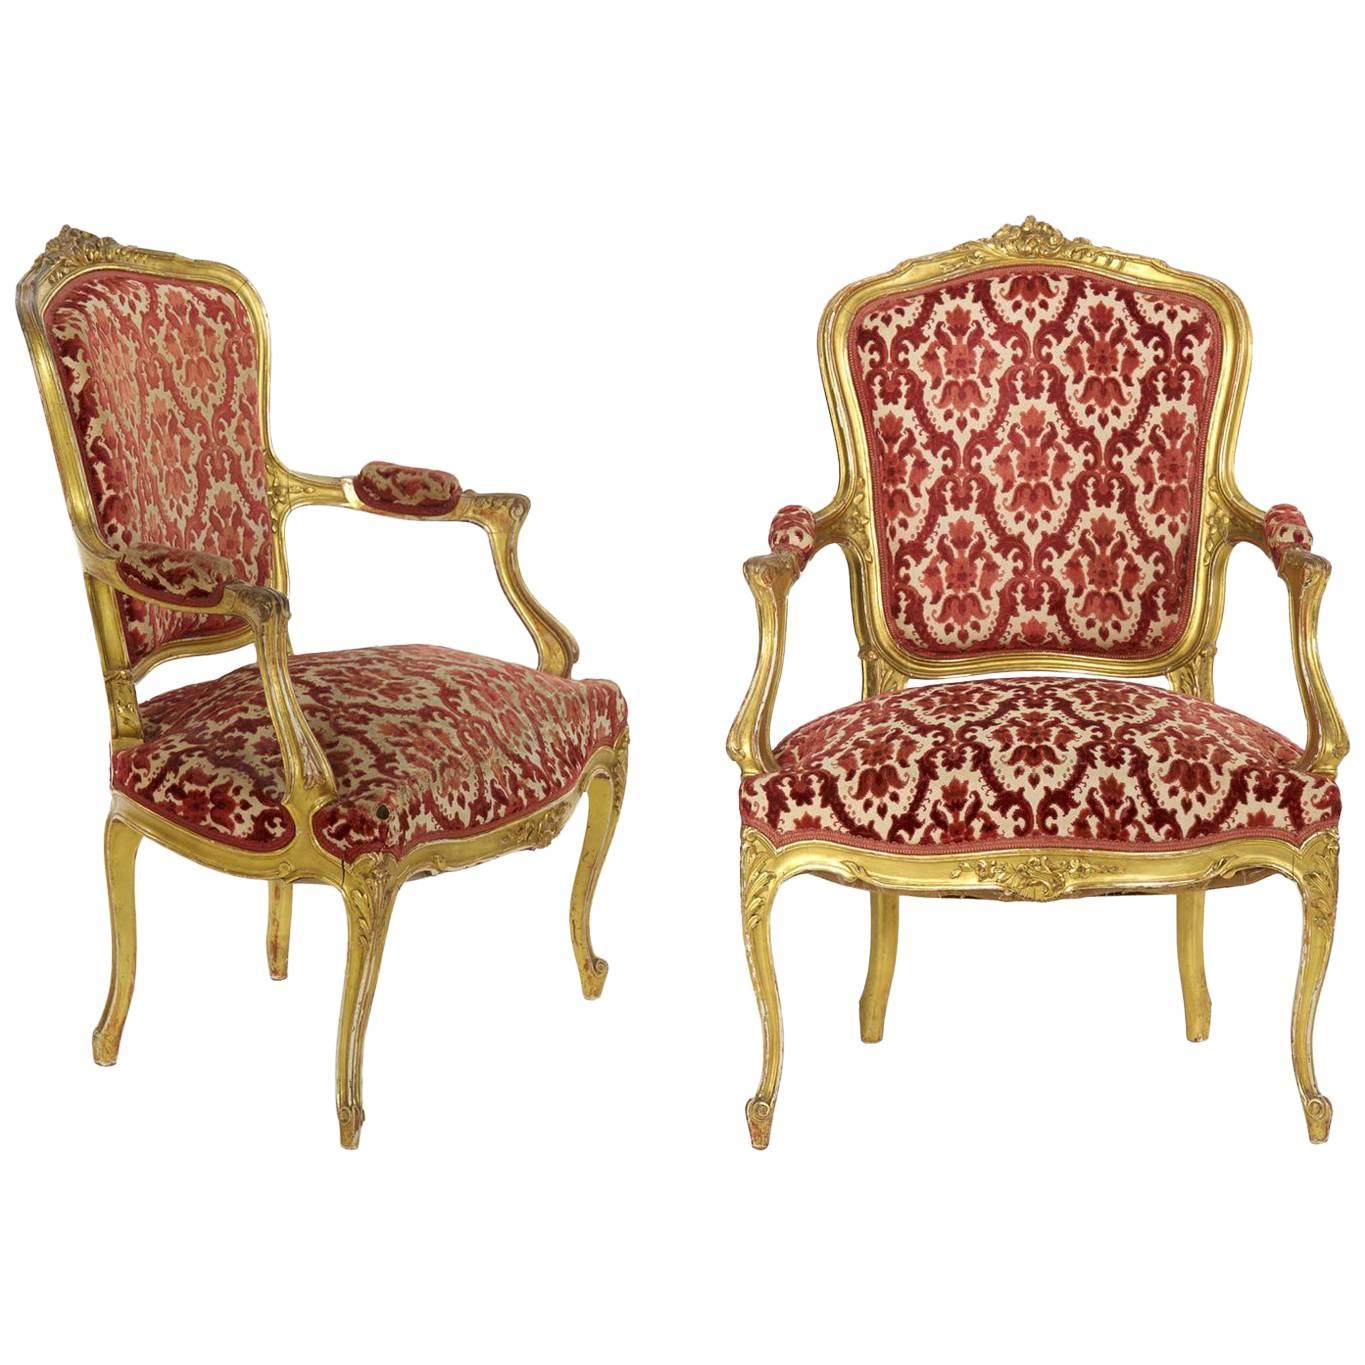 Pair of French Louis XV Style Giltwood Antique Armchairs Fauteuils, circa 1900